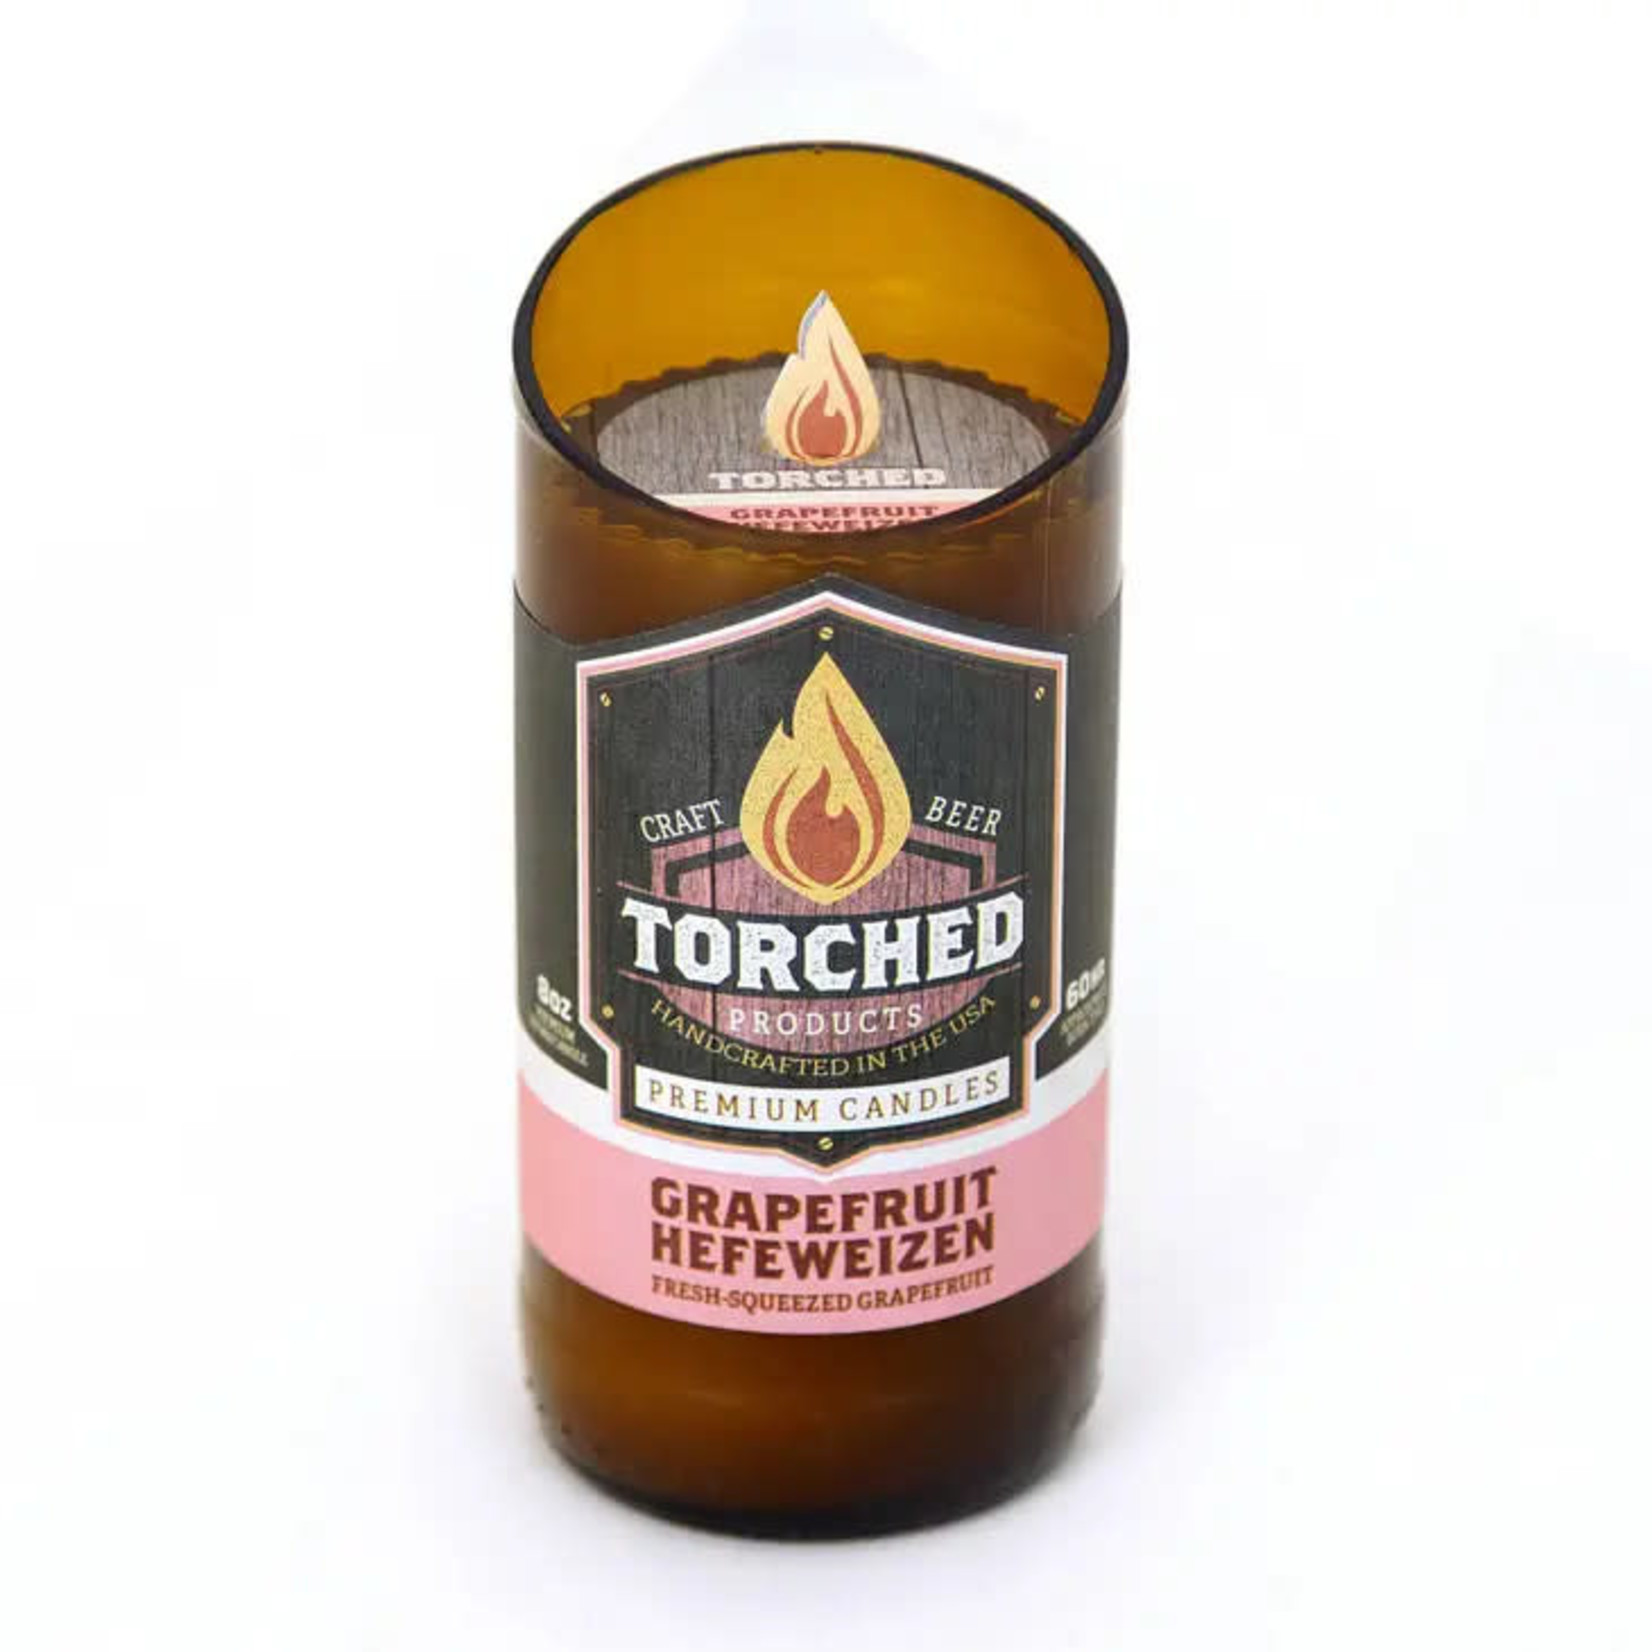 Torched Products 8 oz Beer Candle